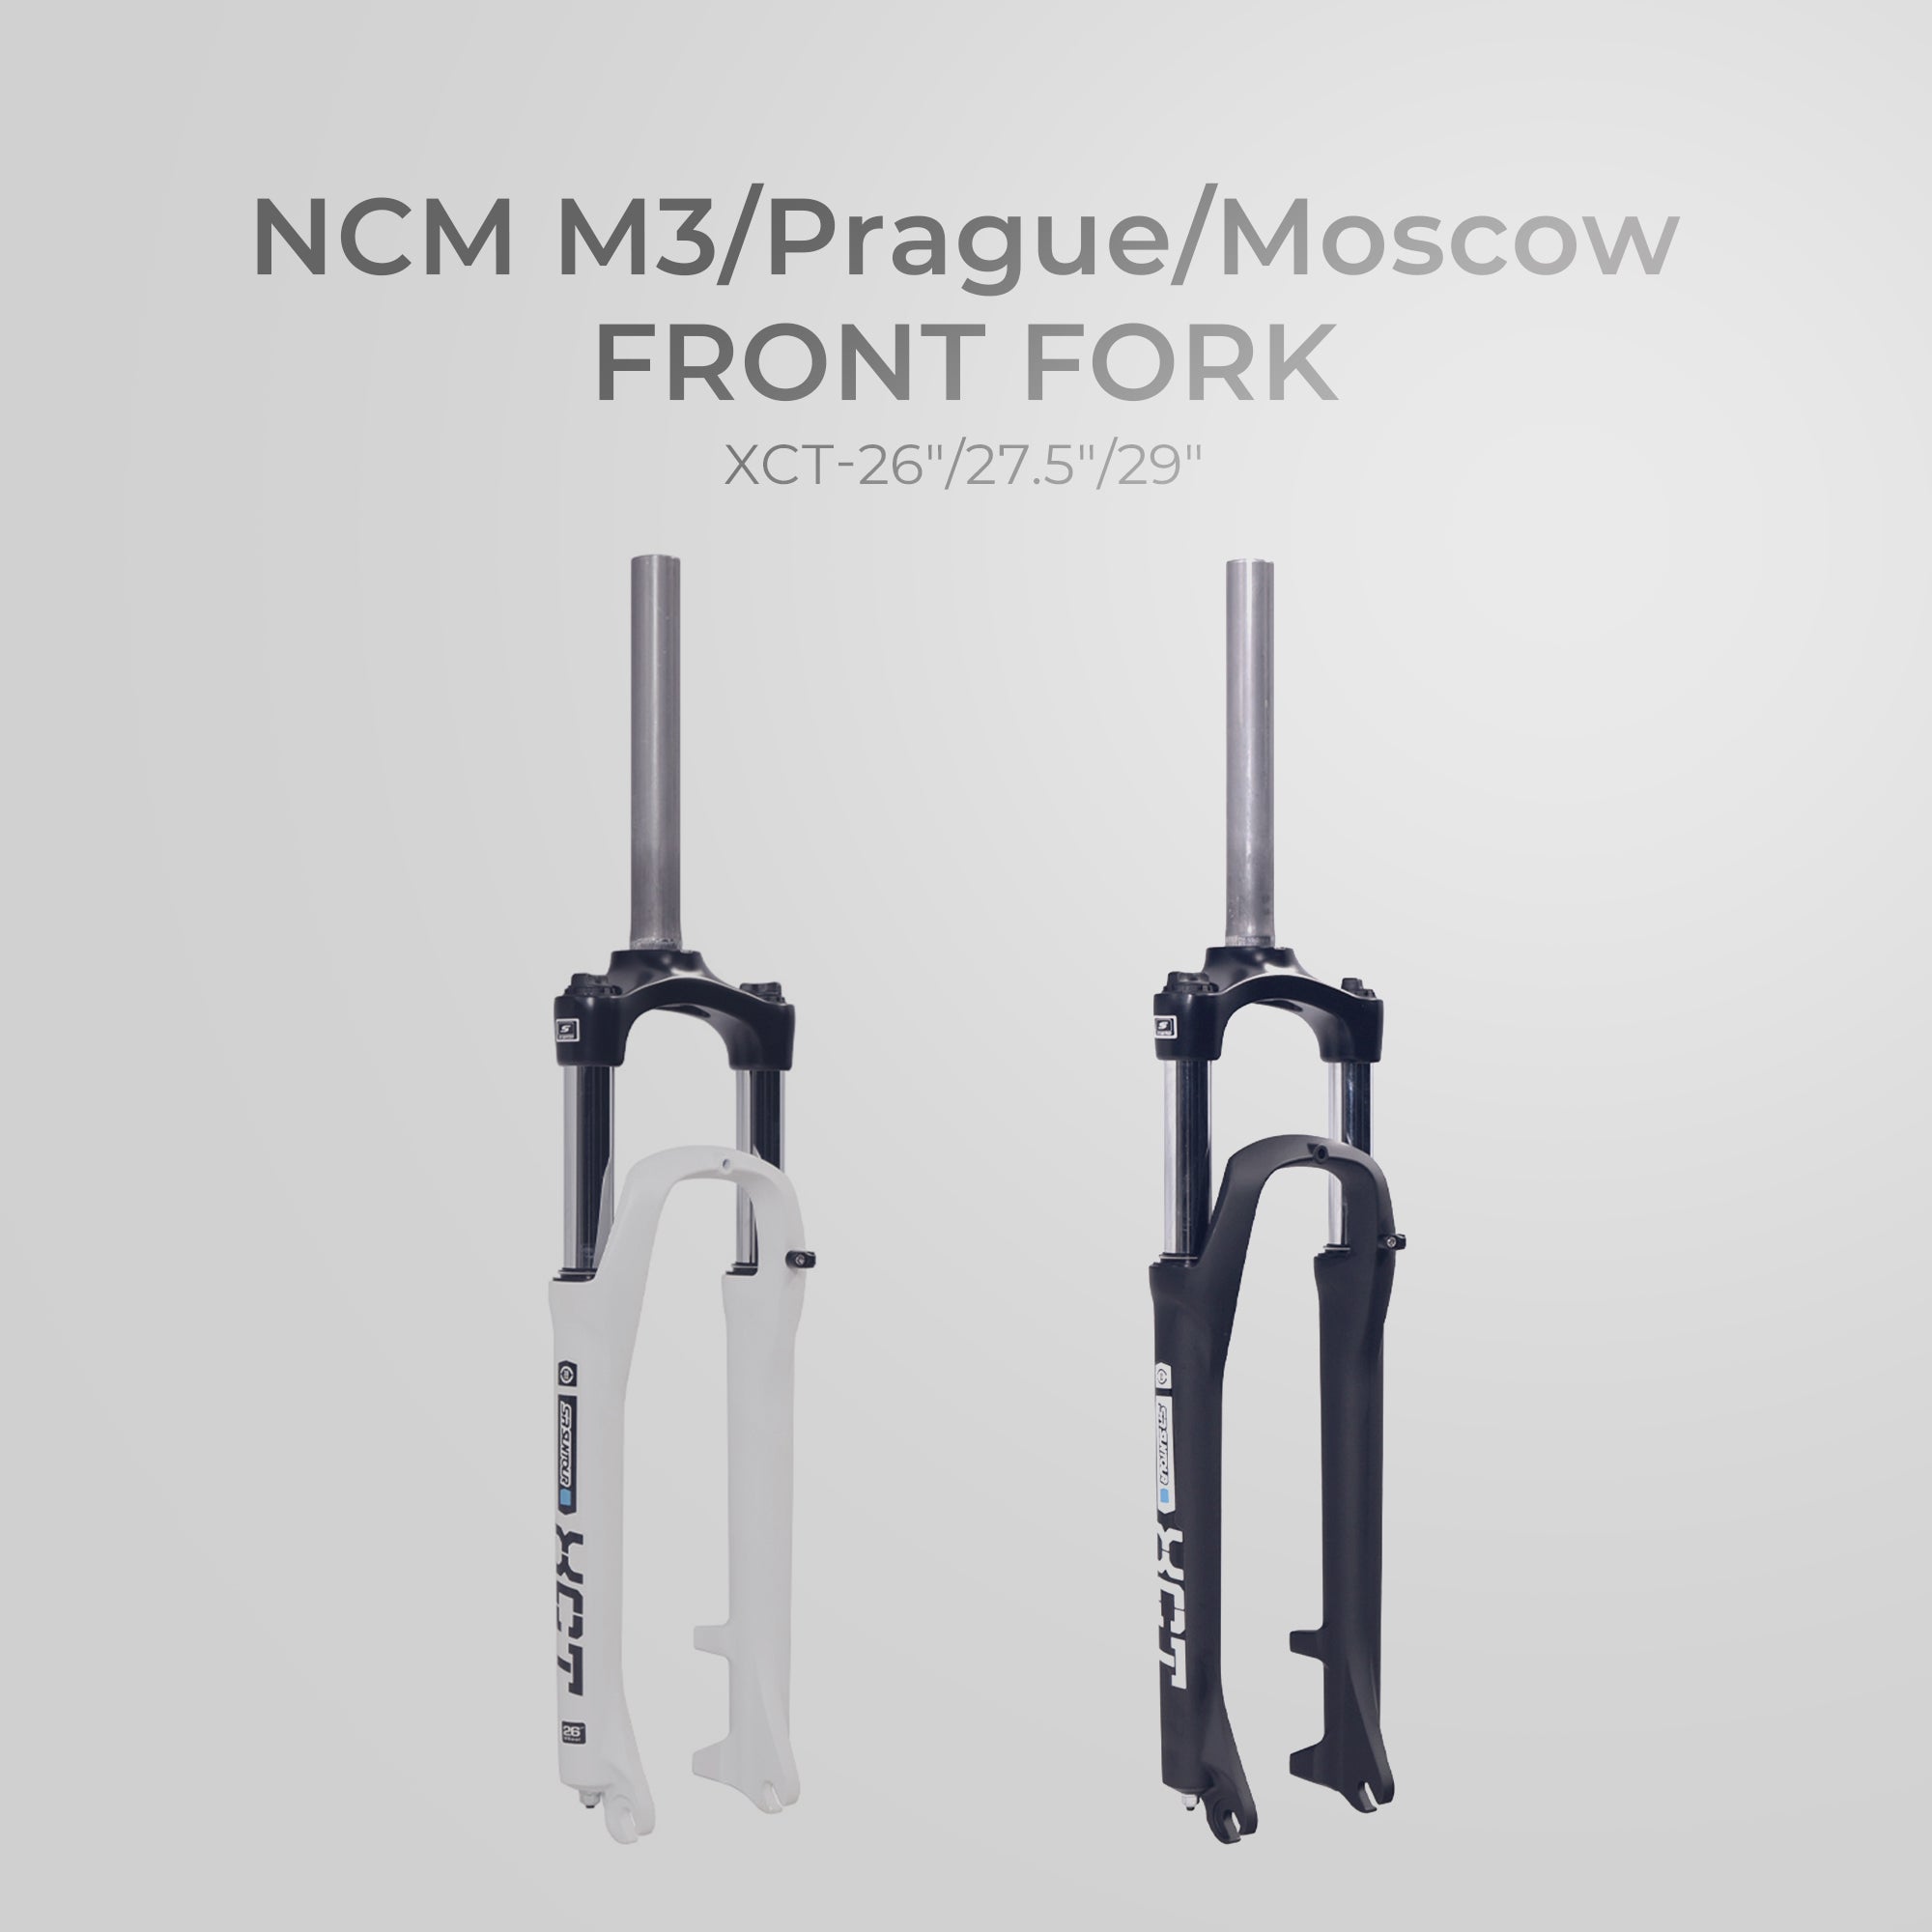 NCM M3/Prague/Moscow Front Fork - XCT-26